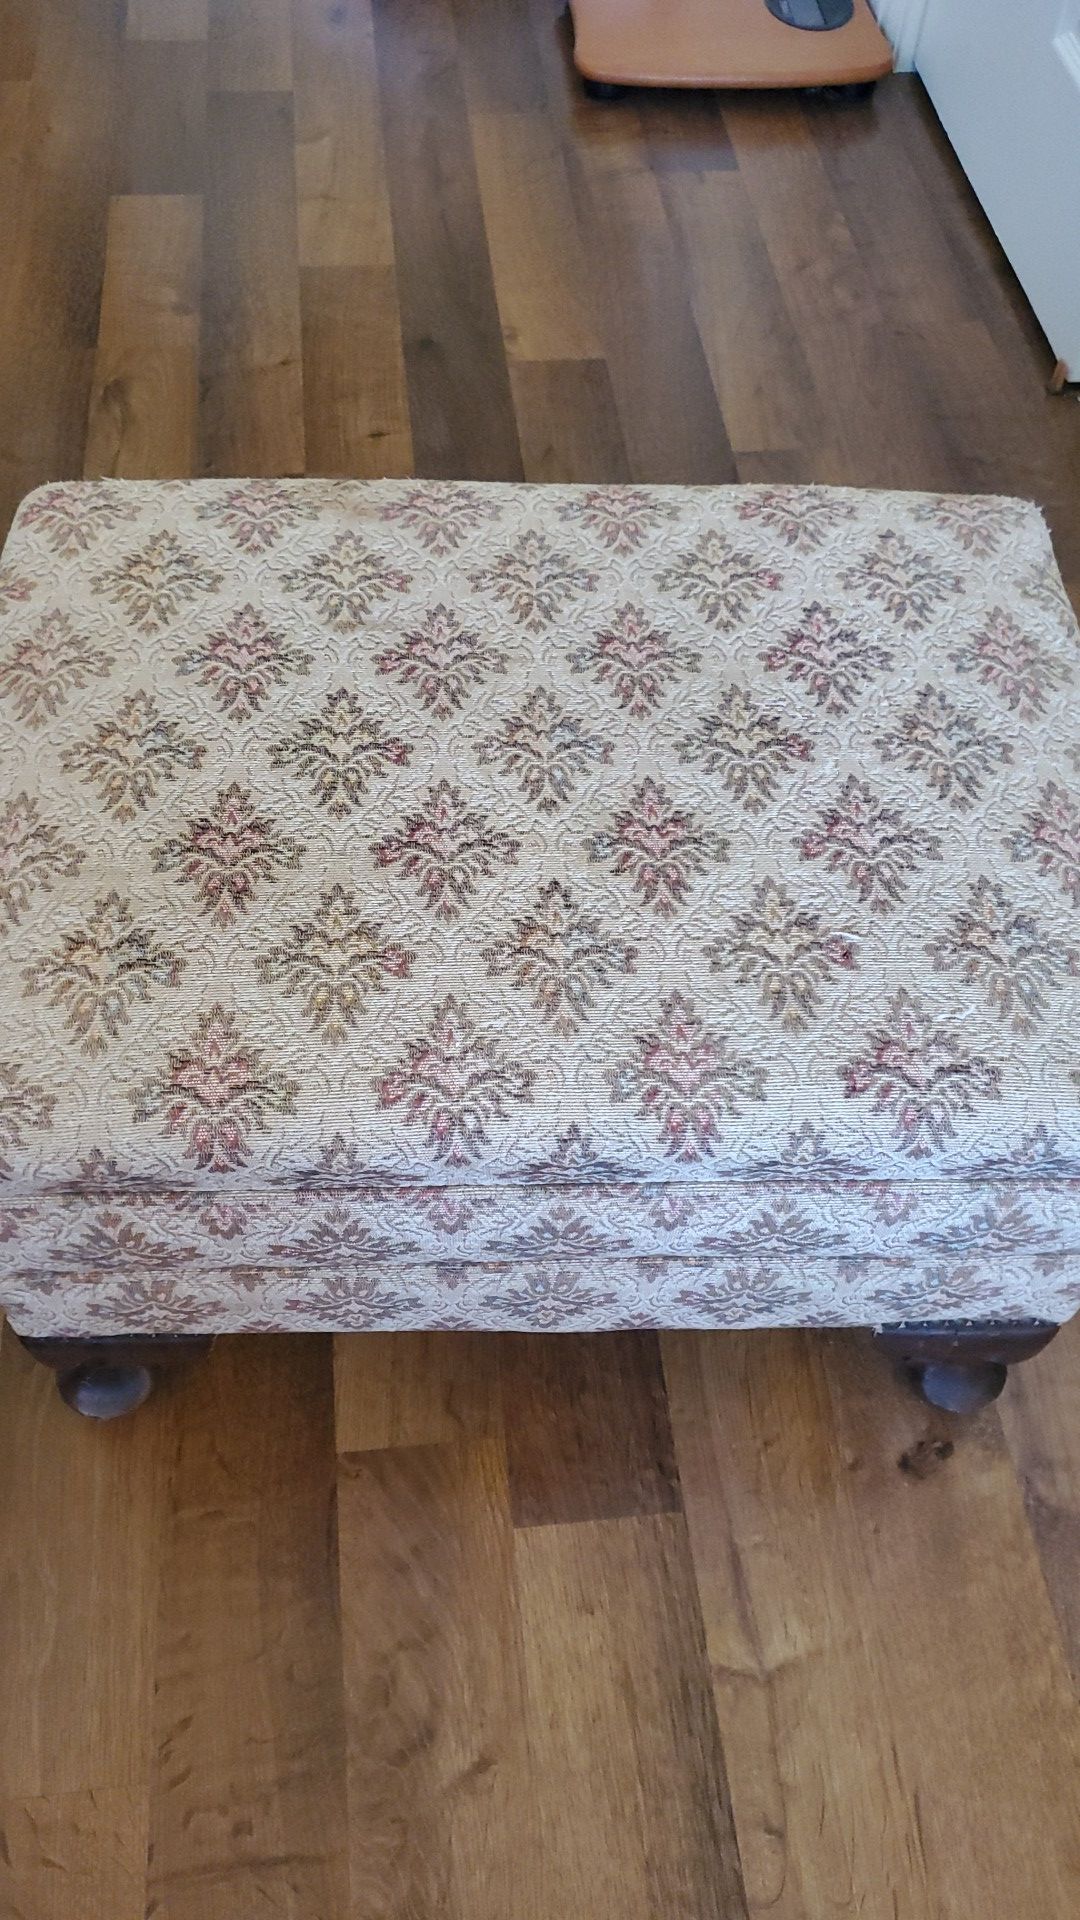 Small ottoman16 by 21 14 high